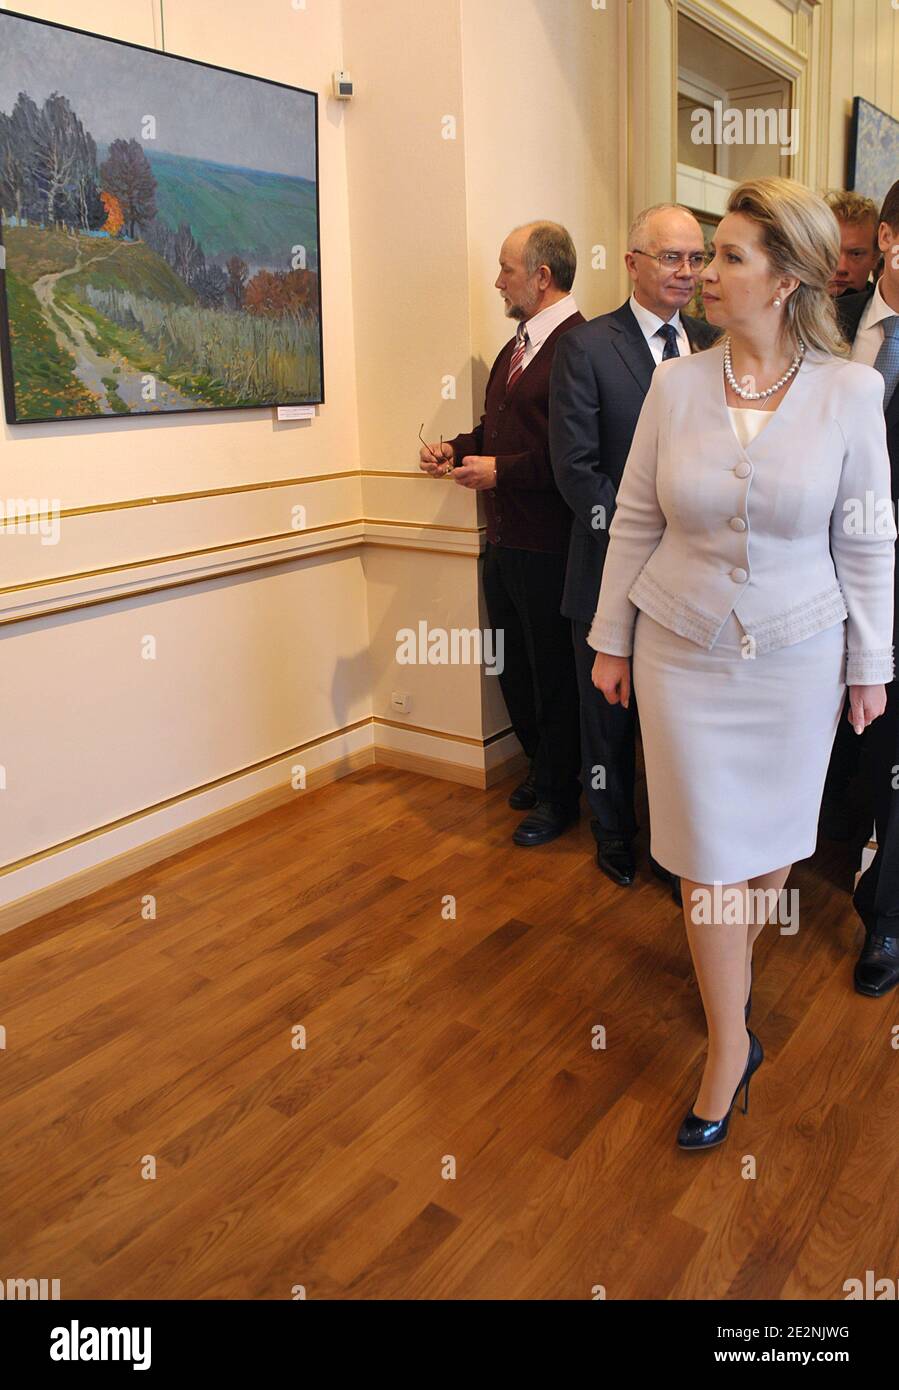 Russia's First Lady Svetlana Medvedeva visits the Exhibition 'Une Fenetre Sur La Russie' at the Russian Culture and Science Center in Paris, France on March 2, 2010. Photo by Giancarlo Gorassini/ABACAPRESS.COM Stock Photo